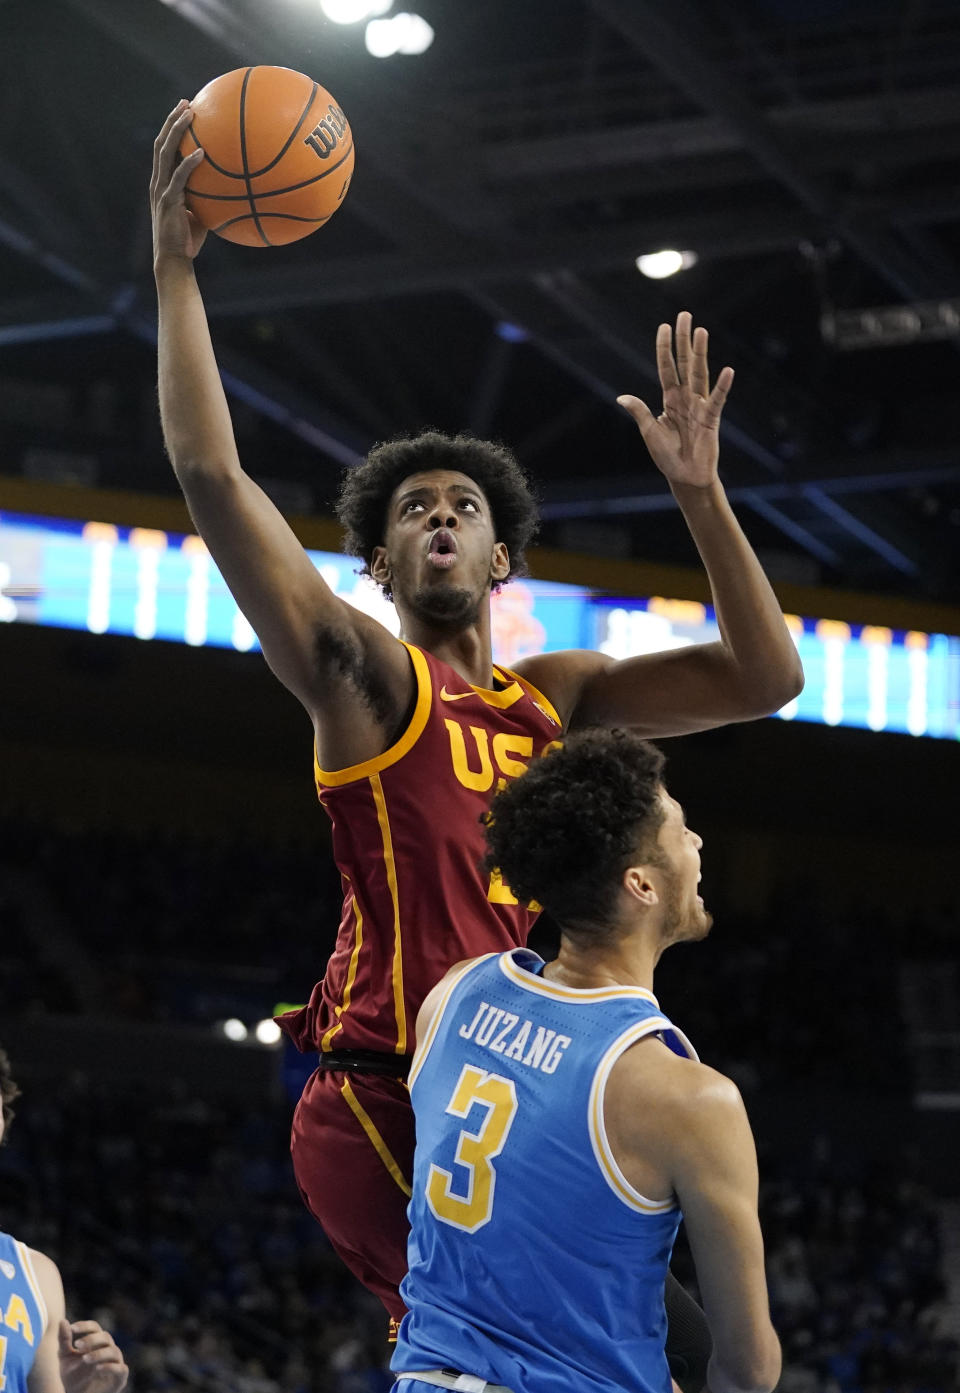 Southern California forward Joshua Morgan, left, shoots as UCLA guard Johnny Juzang defends during the first half of an NCAA college basketball game Saturday, March 5, 2022, in Los Angeles. (AP Photo/Mark J. Terrill)